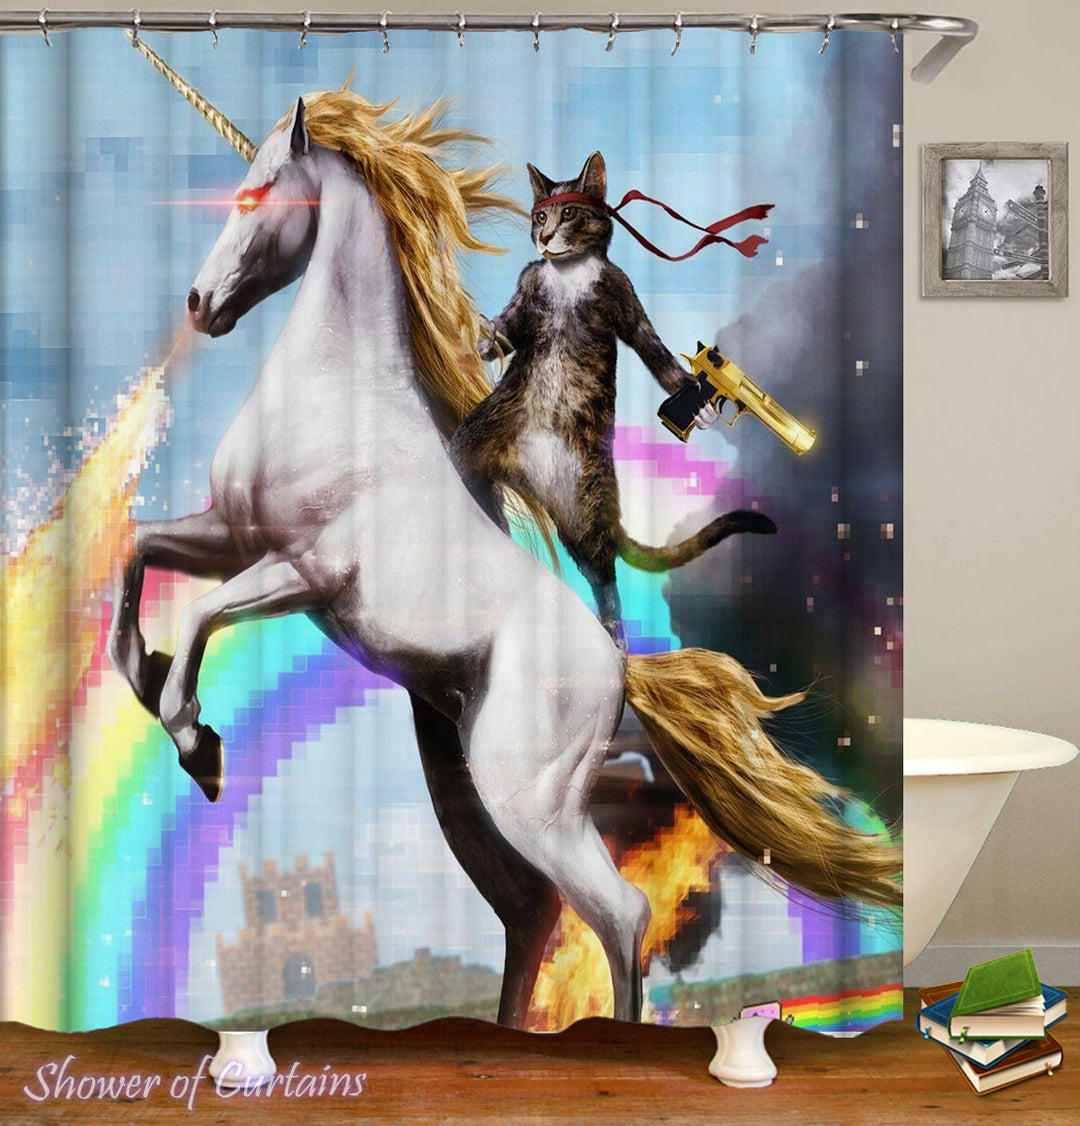 Crazy Shower Curtains of Cat Riding A Unicorn